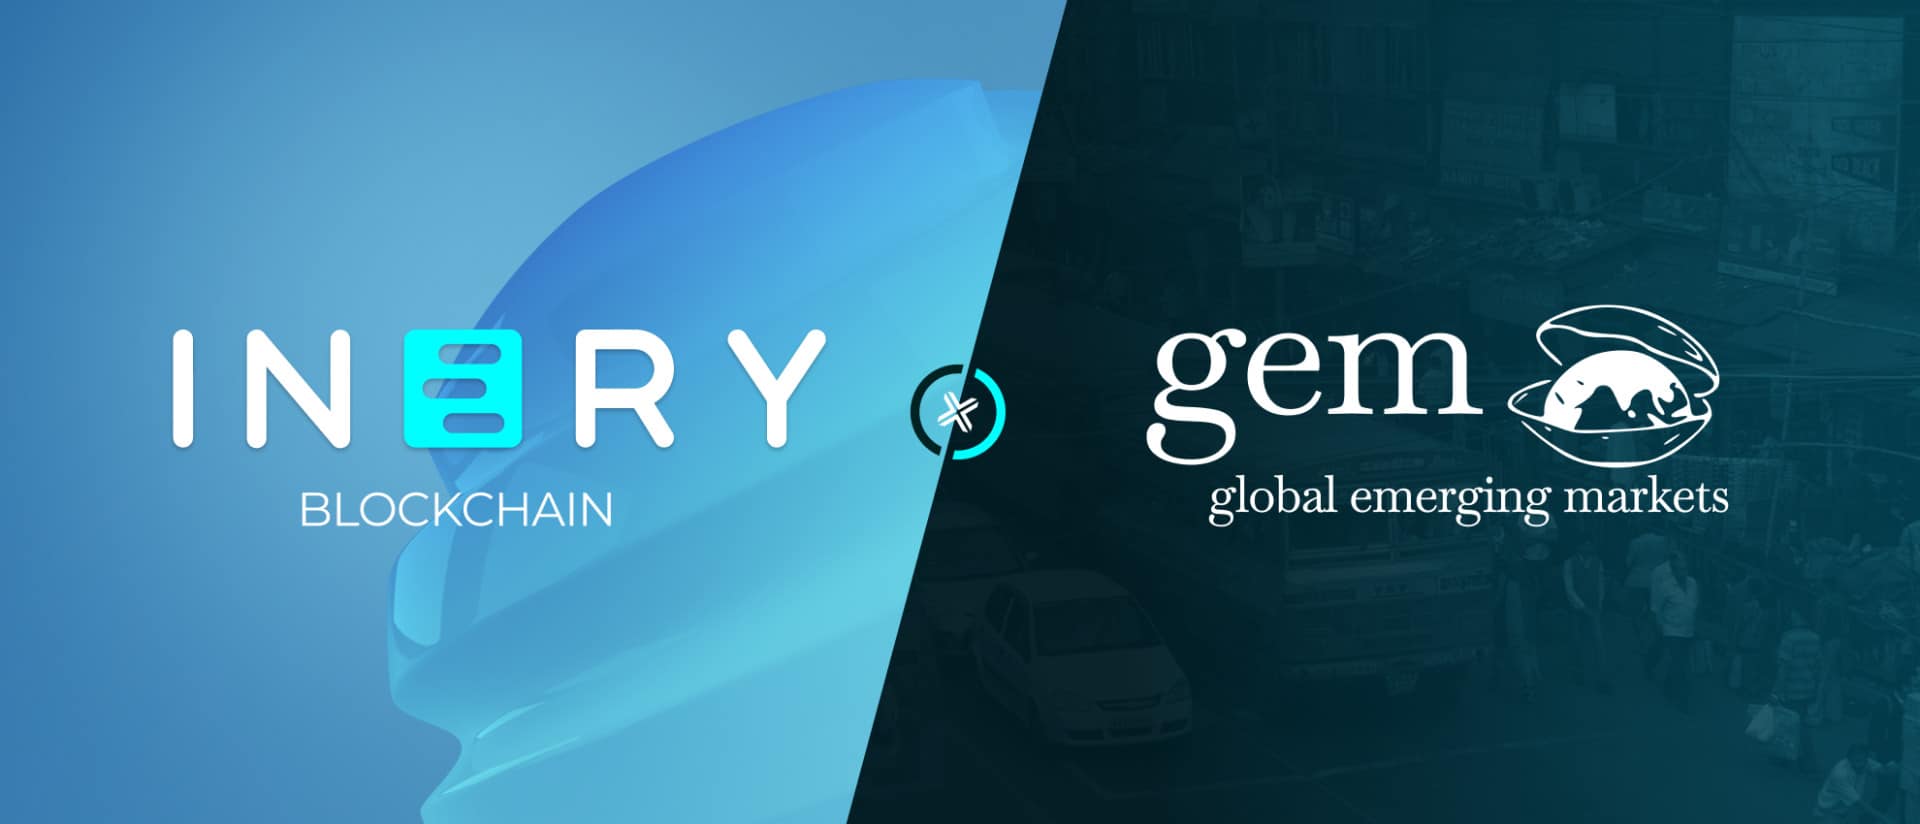 Gem-digital-limited-commits-$50m-to-inery-ahead-of-the-coin-launch-and-listing